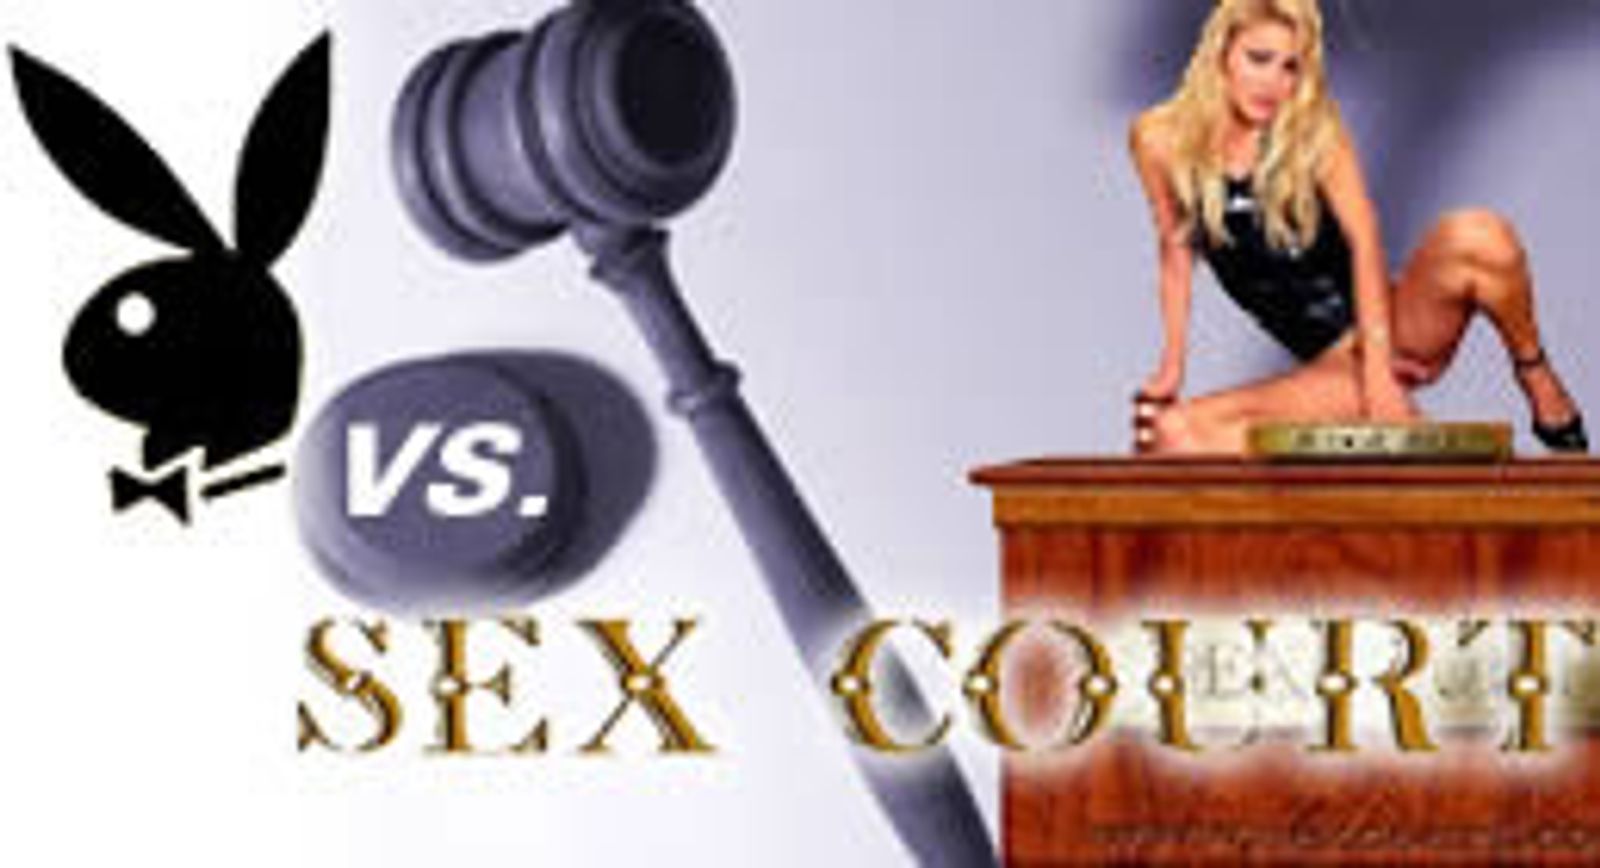 <I>Sex Court</I> In Real Court Accused of Cybersquatting